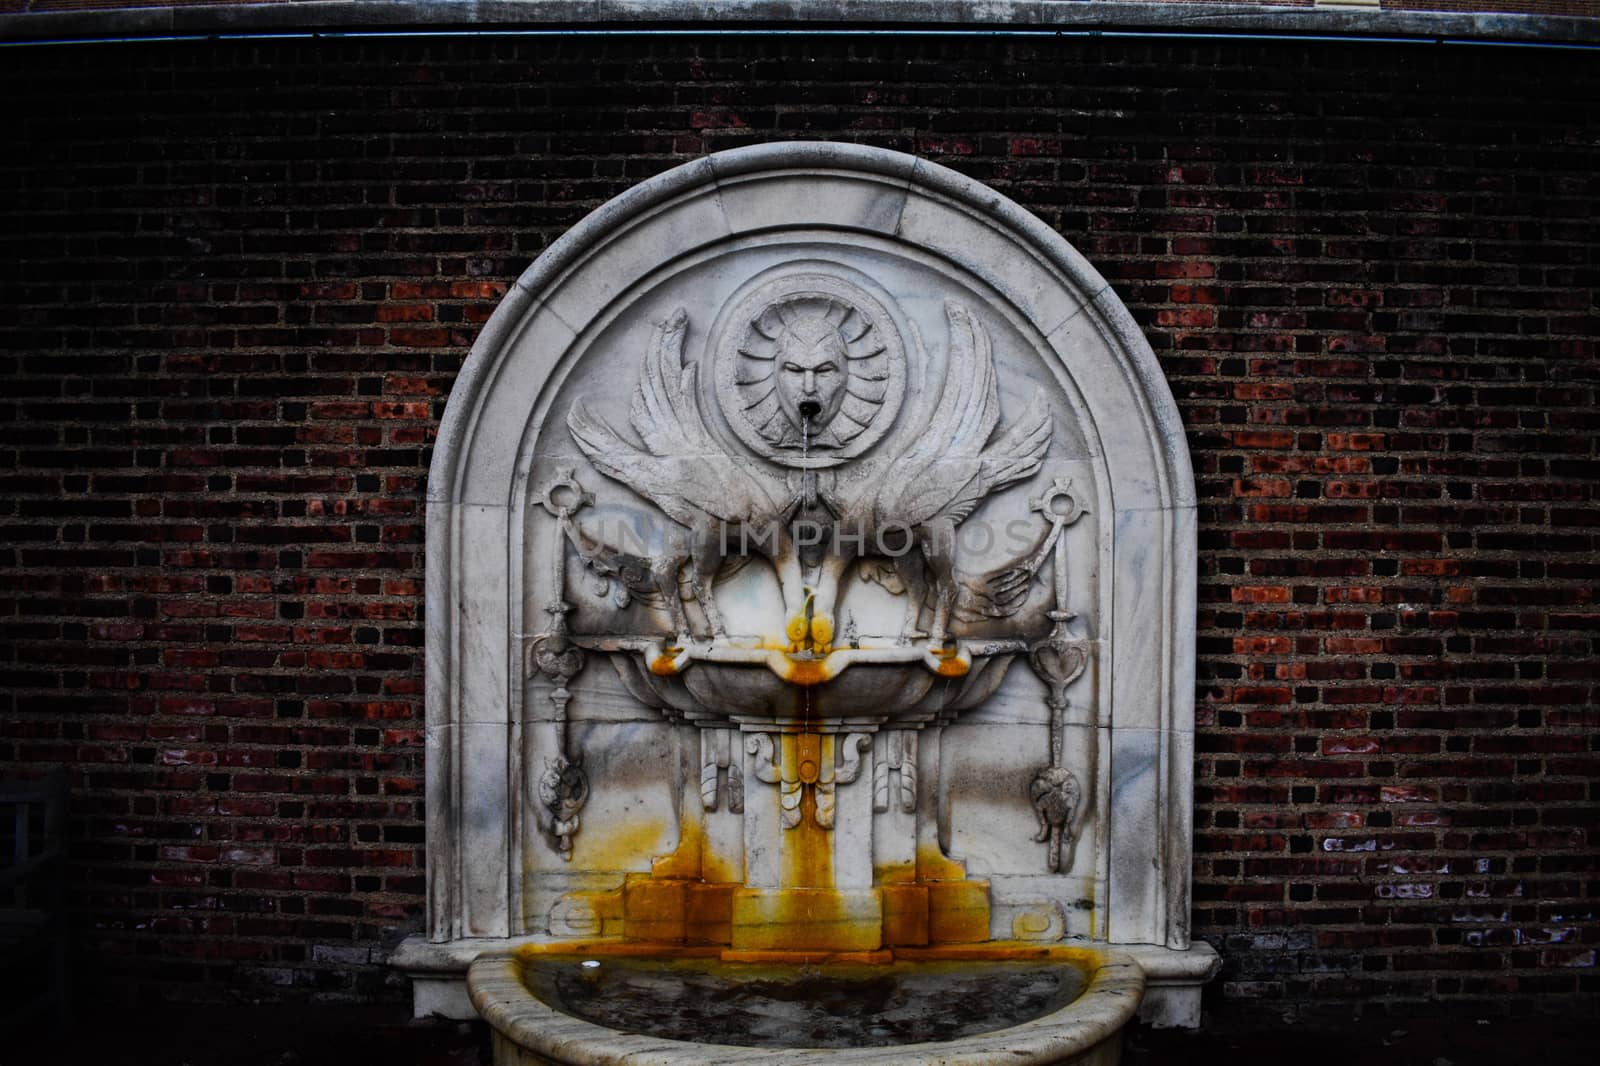 A Flowing Ornate Marble Fountain With Rust Stains From Years of Use